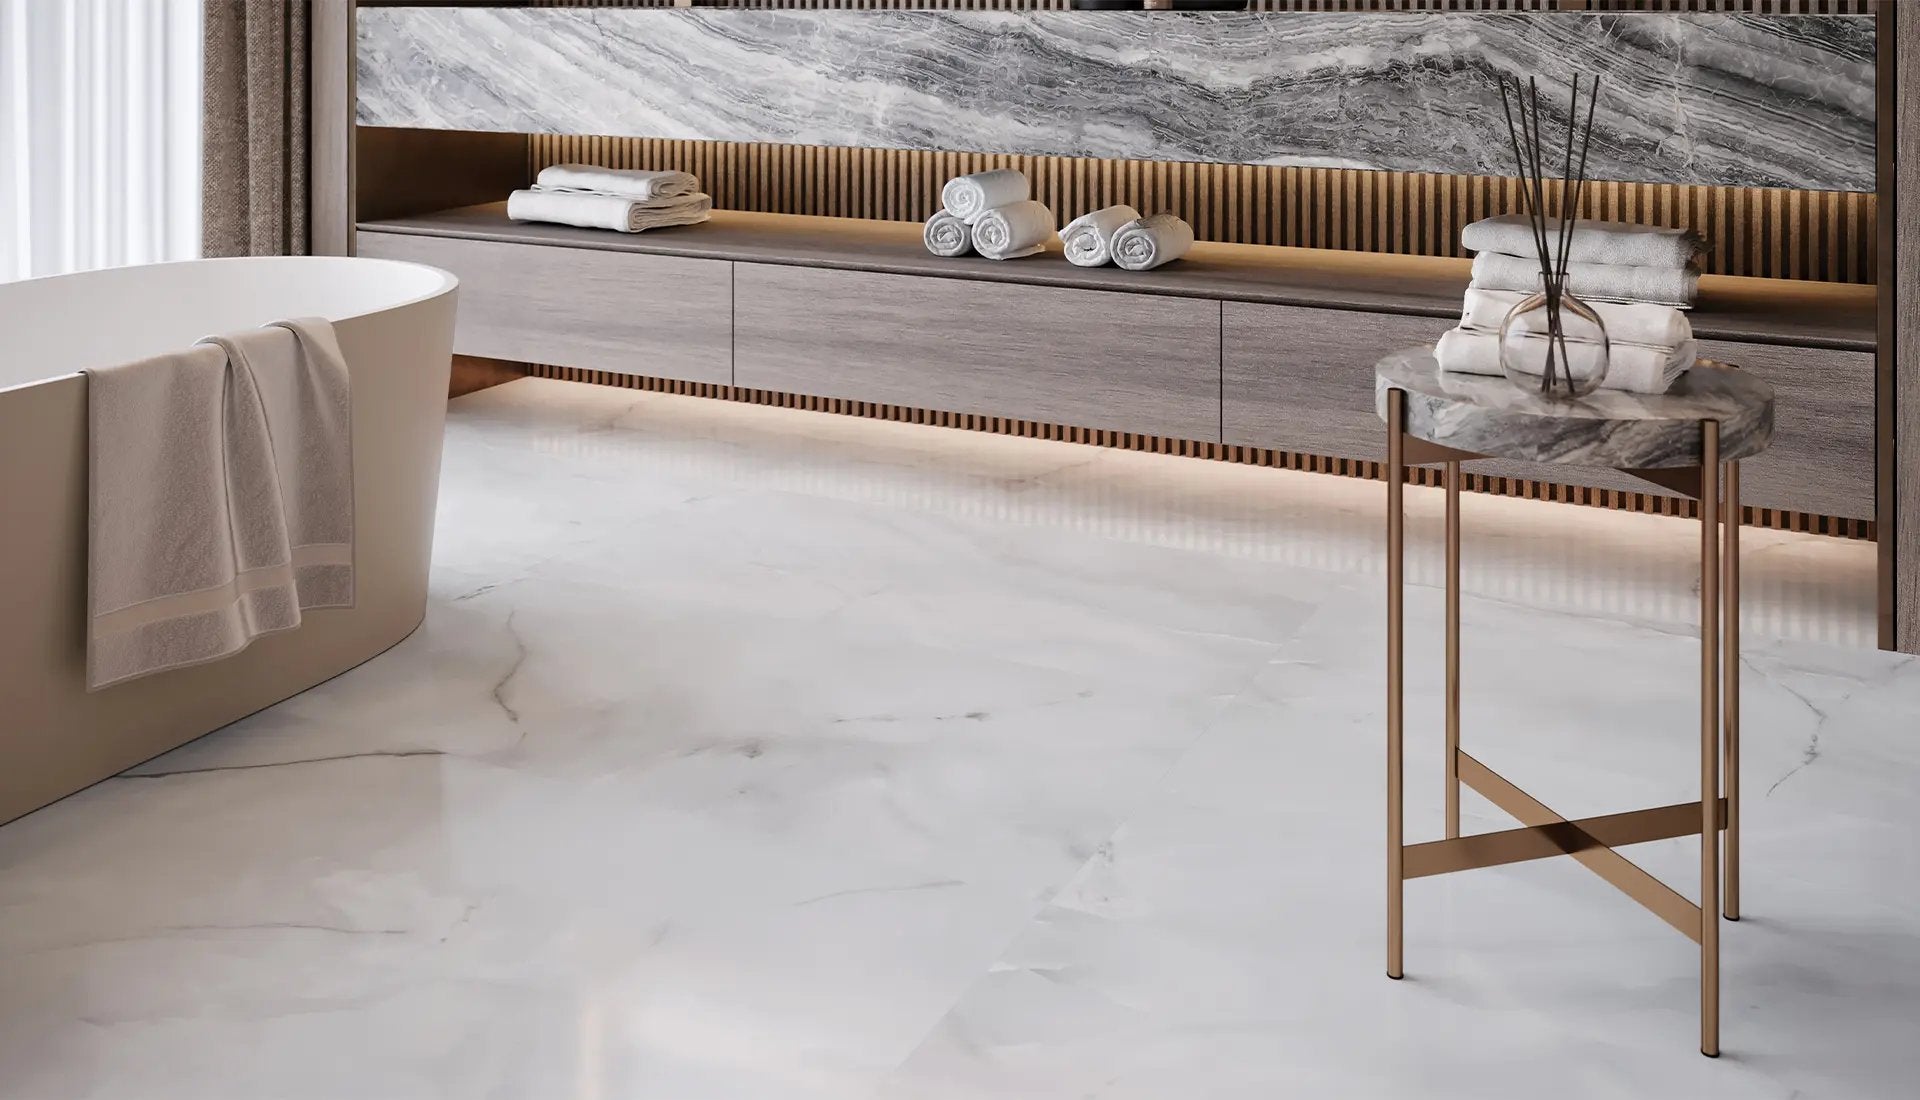 Modern bathroom featuring Anatolia La Marca porcelain tile collection with marble effect on floor and walls, showcasing elegant design and neutral tones